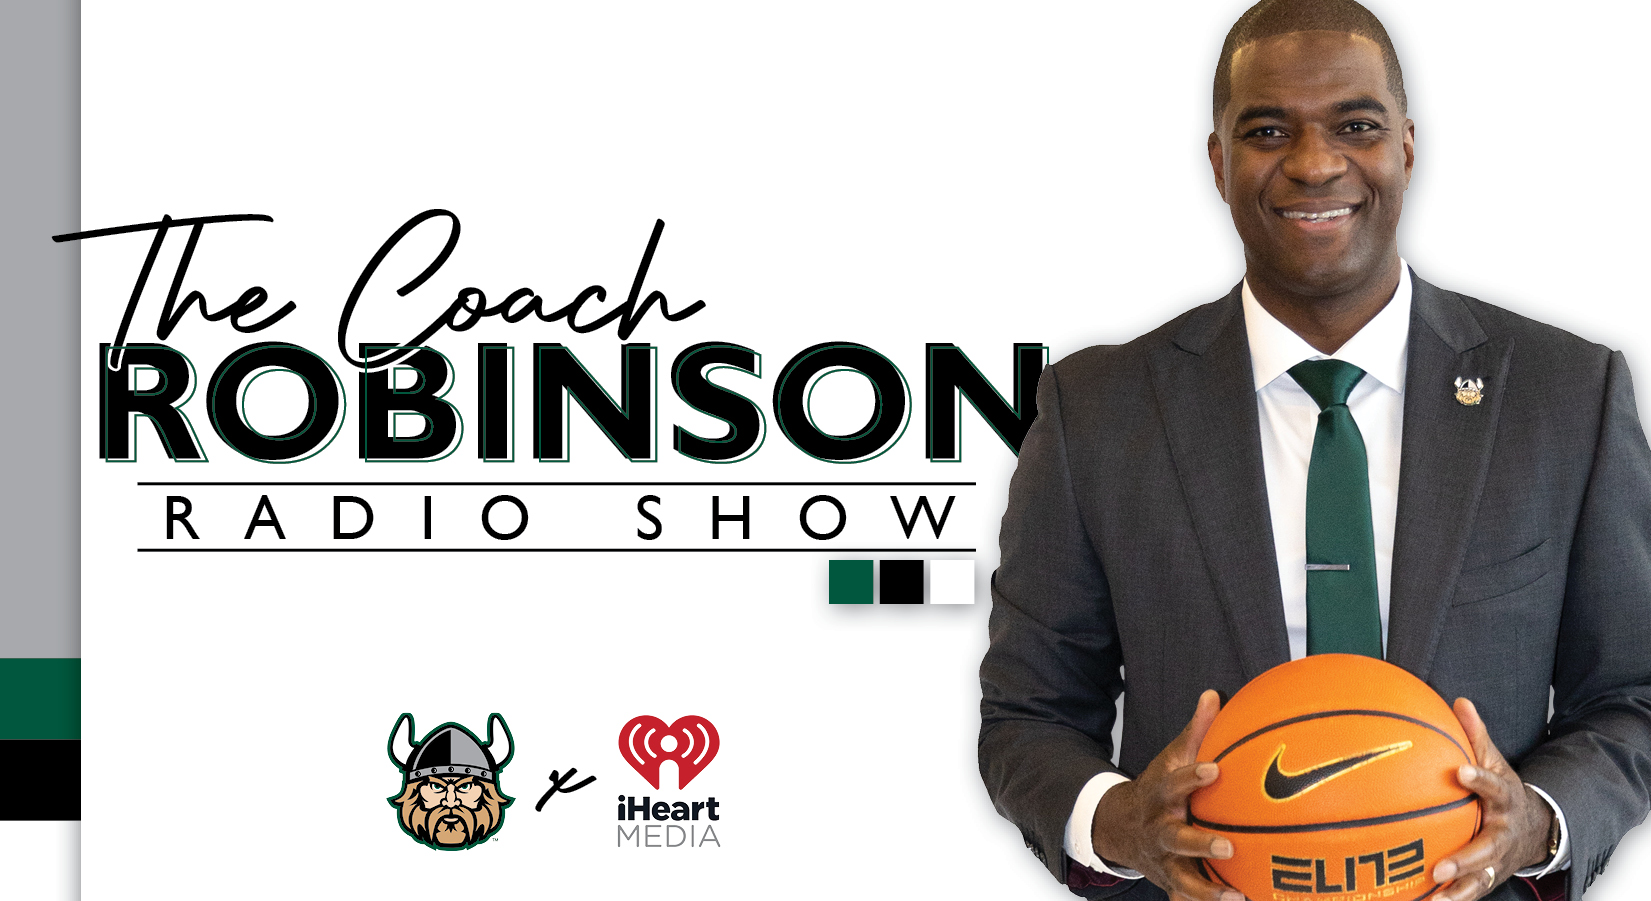 Coach Robinson Show Set to Air Live From Viking Public House Tonight